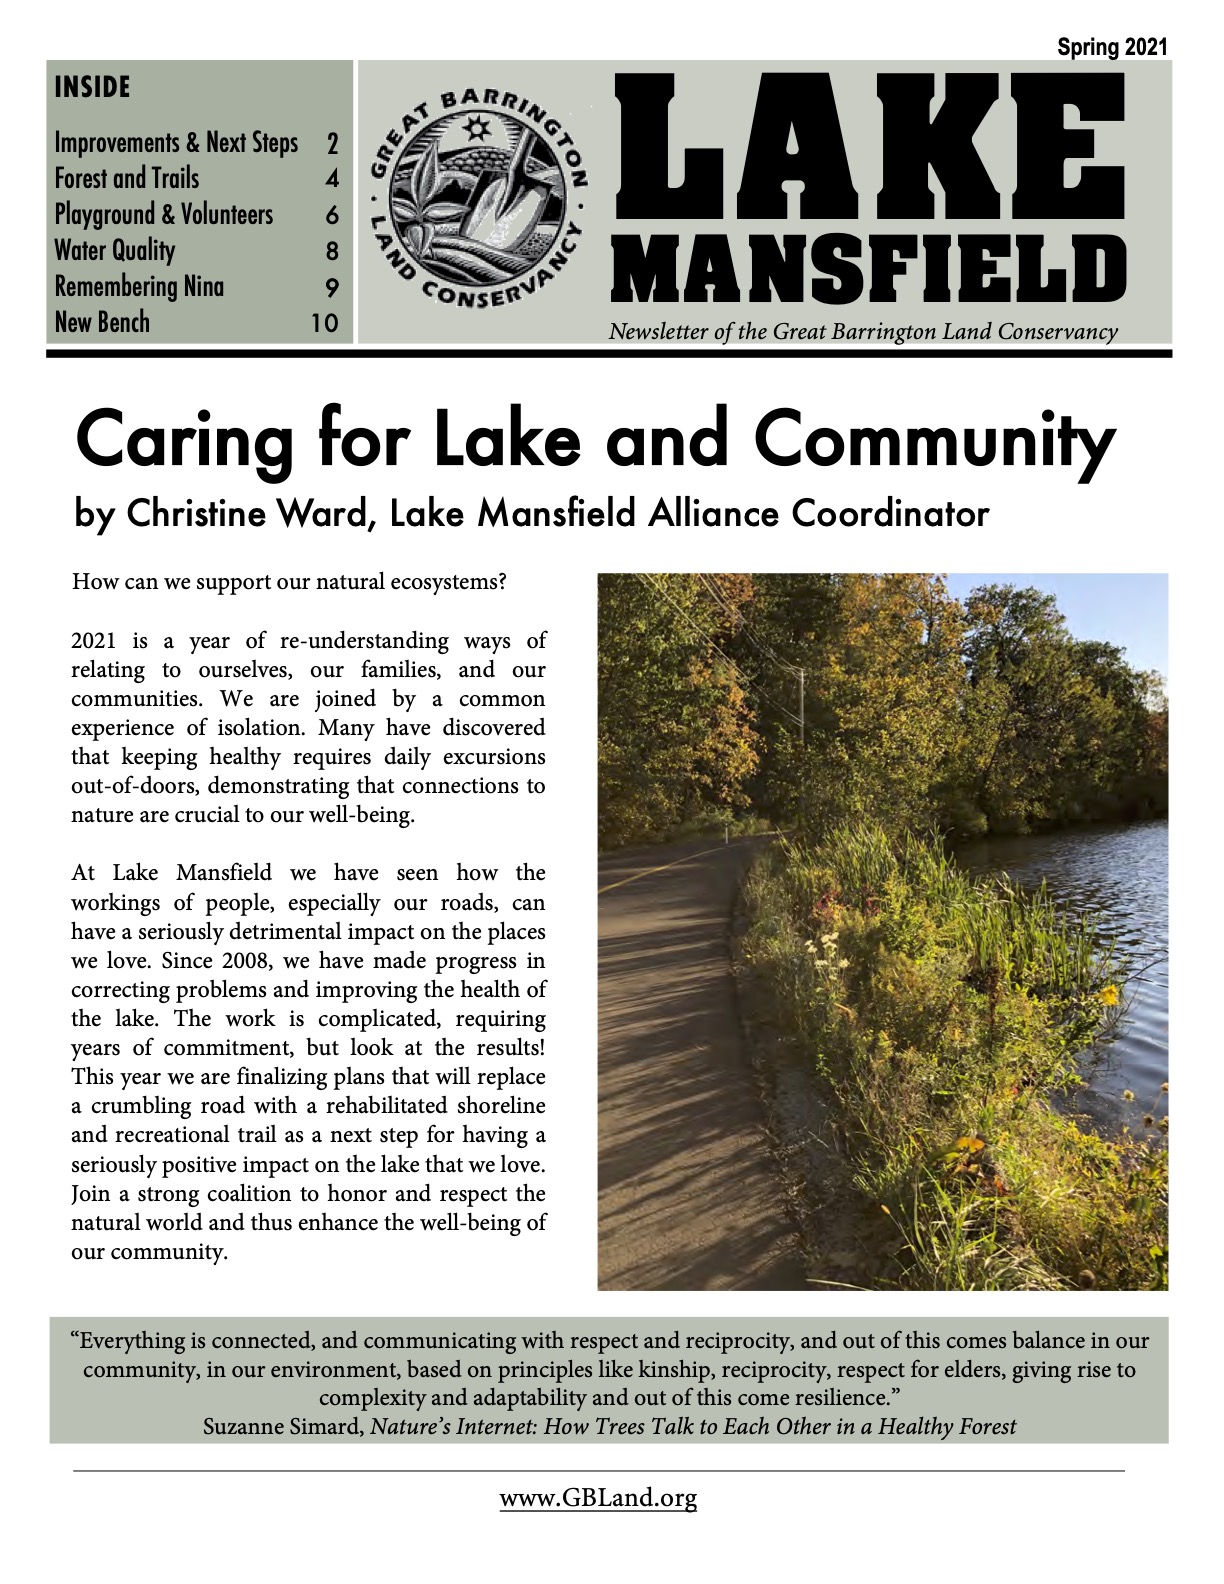 Lake Mansfield Newsletter Spring 2021 front page